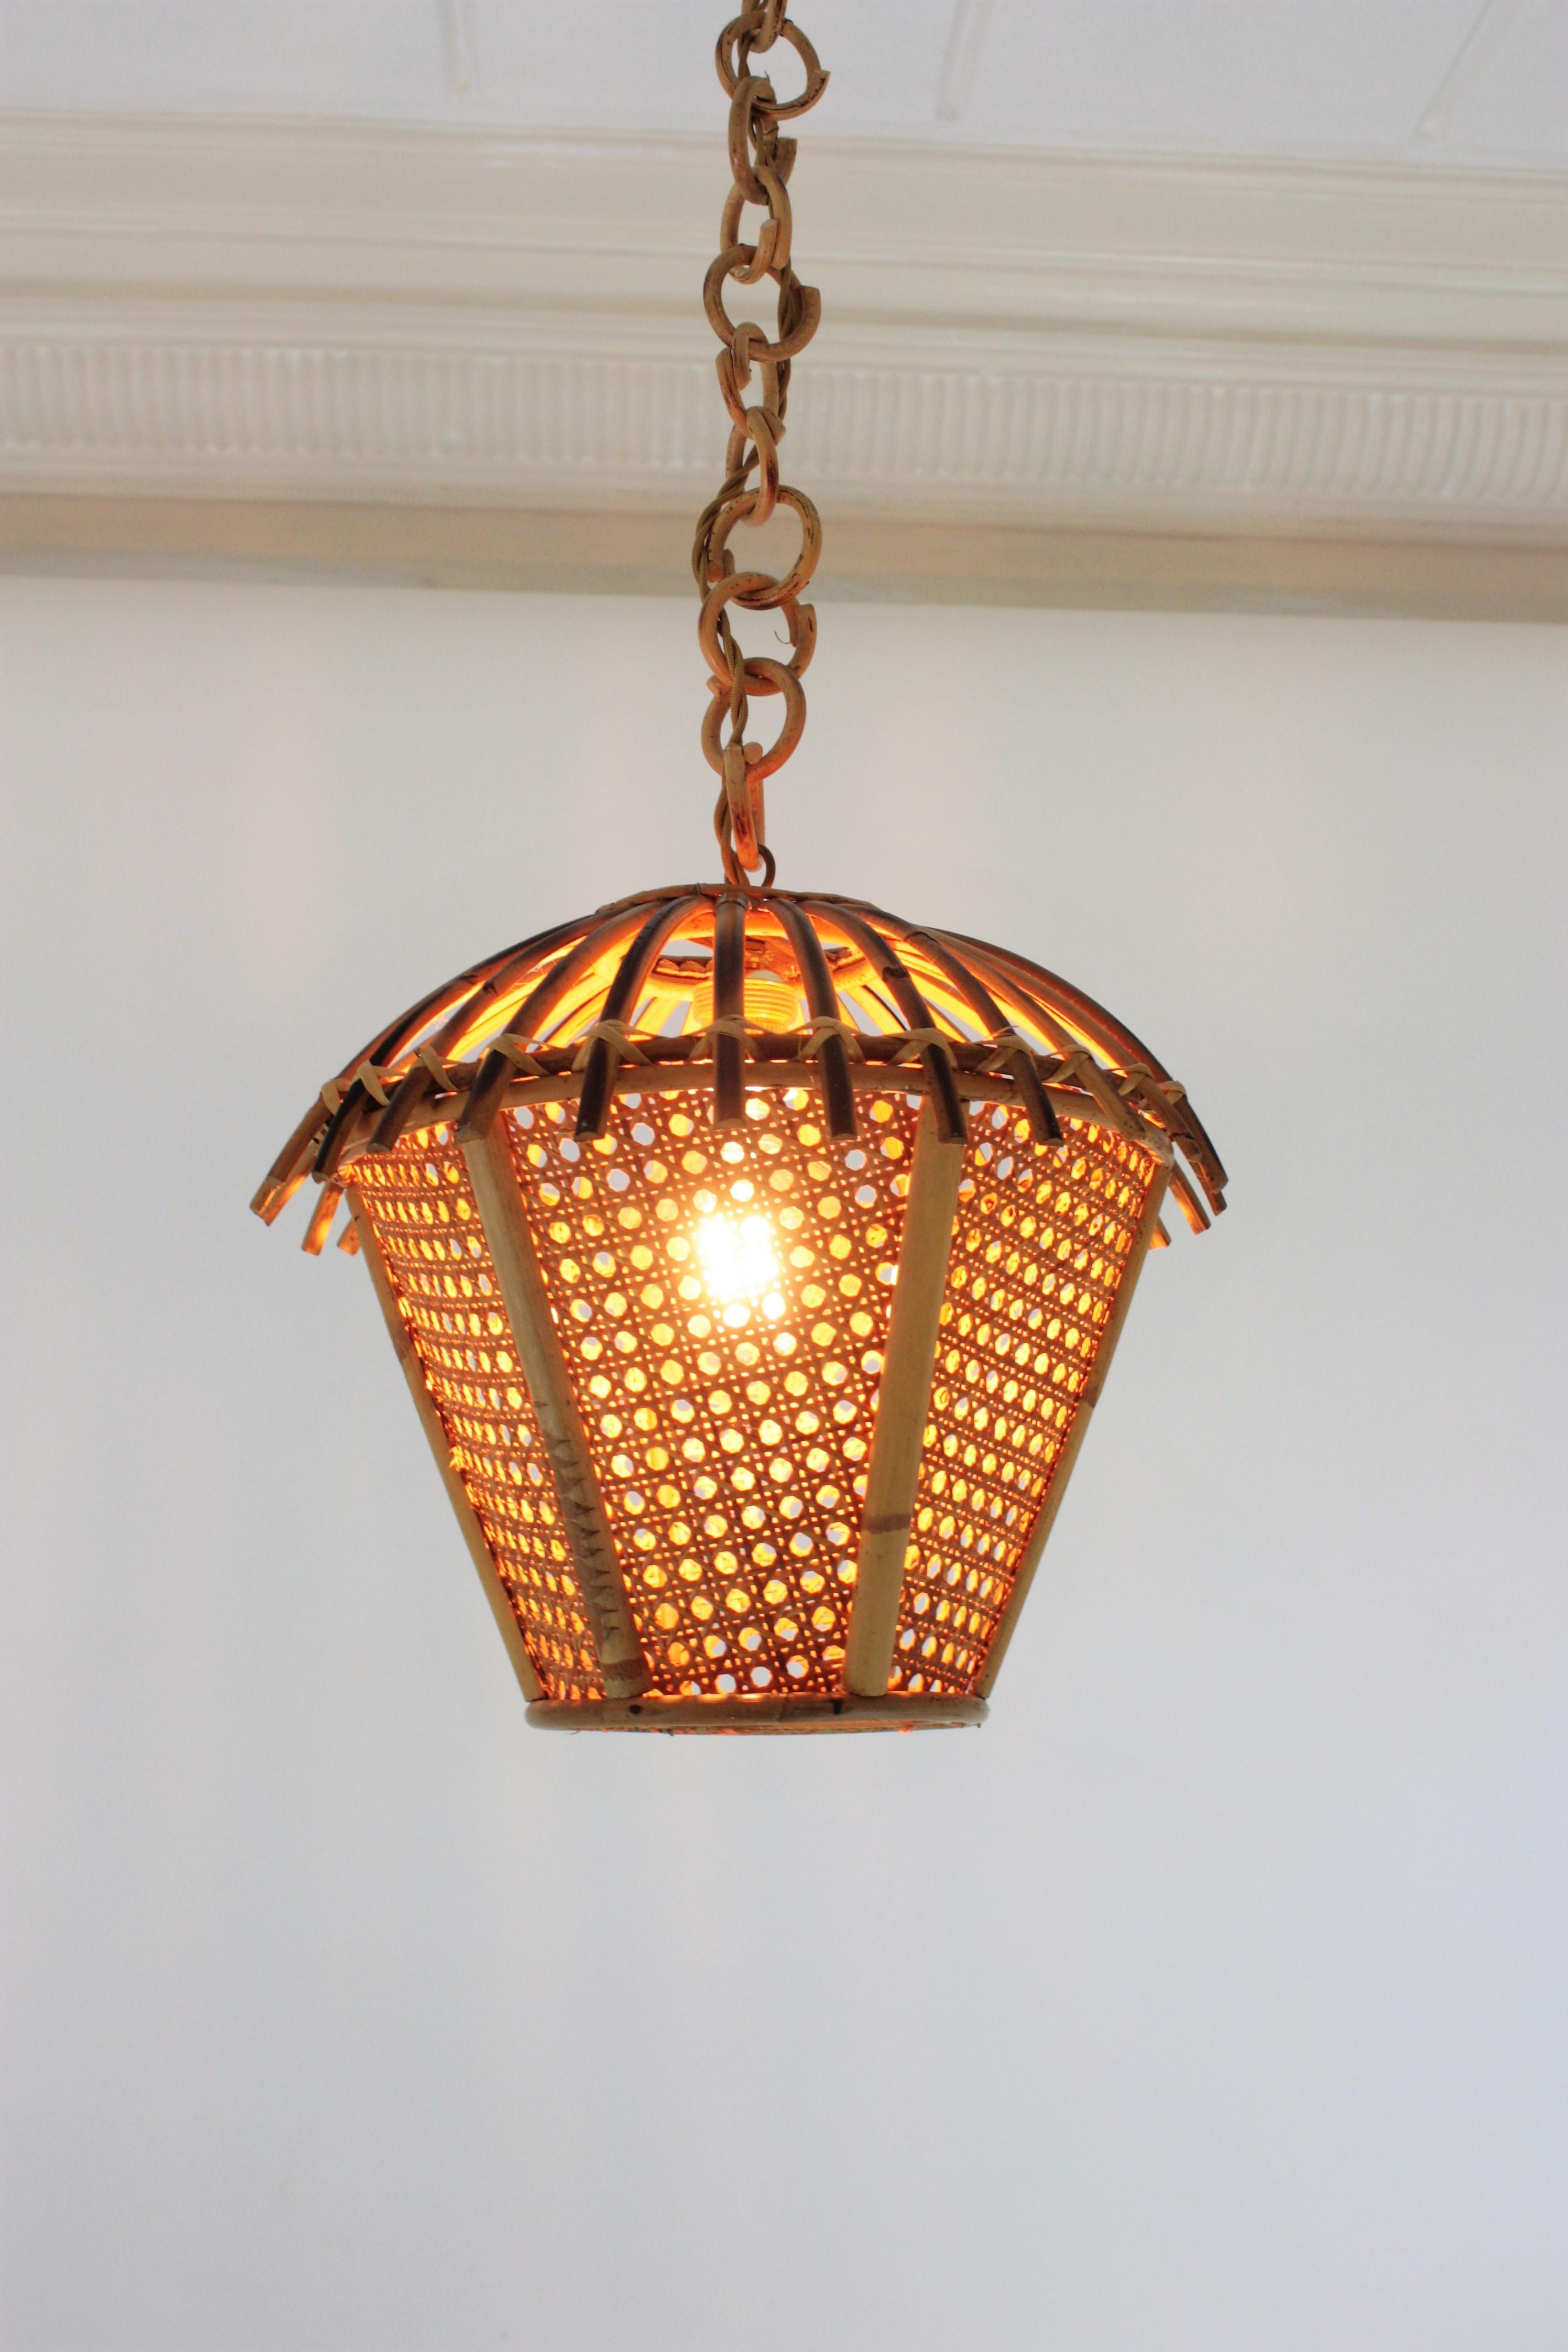 Woven Italian Modernist Rattan and Wicker Wire Pagoda Pendant or Hanging Light, 1960s For Sale